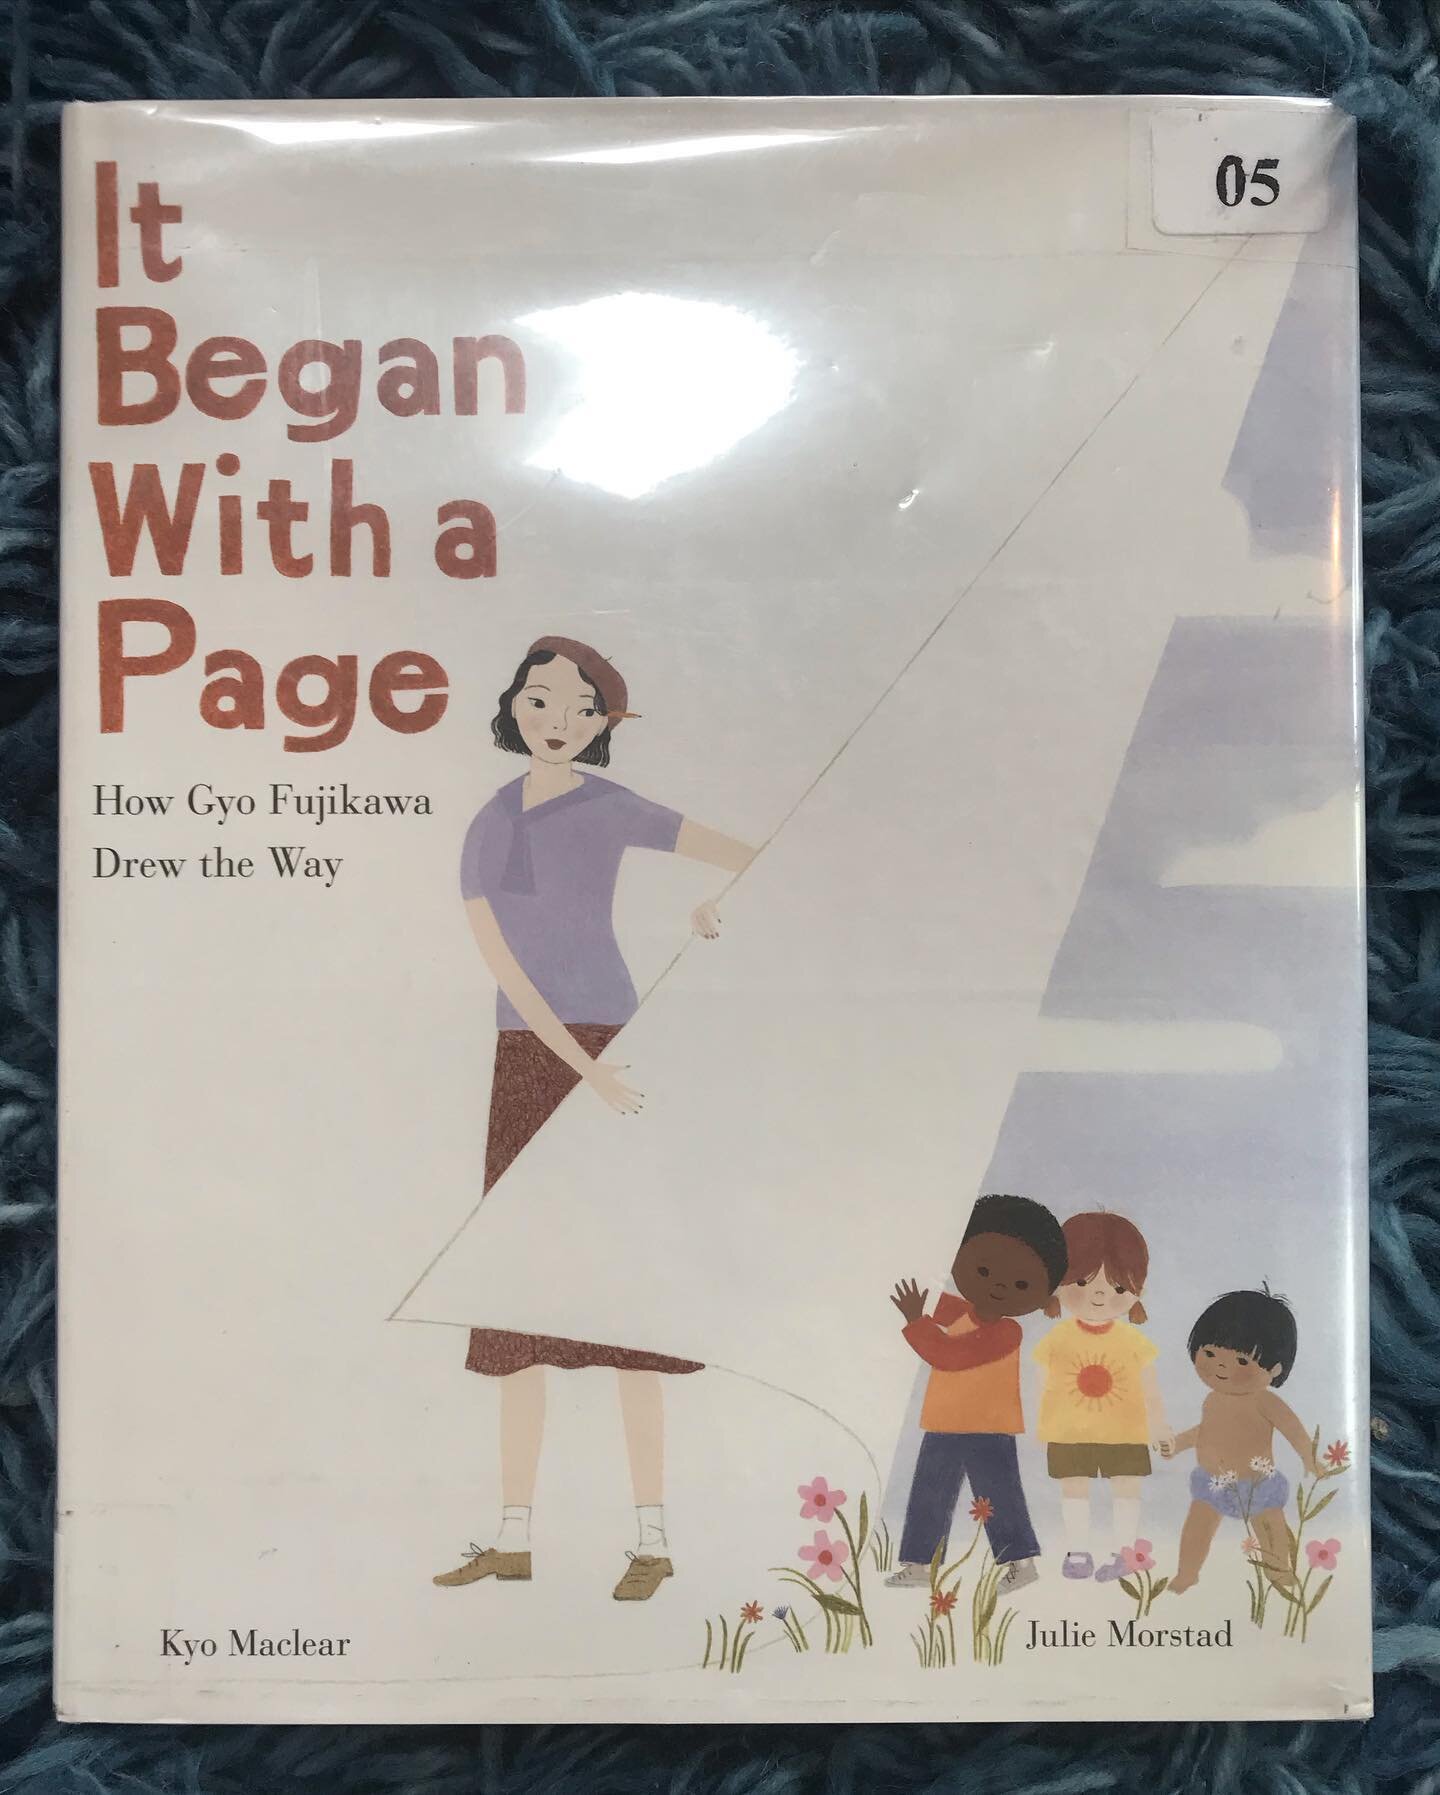 StickHERS loves this fantastic book, It Began With A Page by Kyo Maclear and Julie Morstad (of the wonderful Time is a Flower), about the inspirational and talented Gyo Fujikawa, who was one of the first illustrators to de-segregate children&rsquo;s 